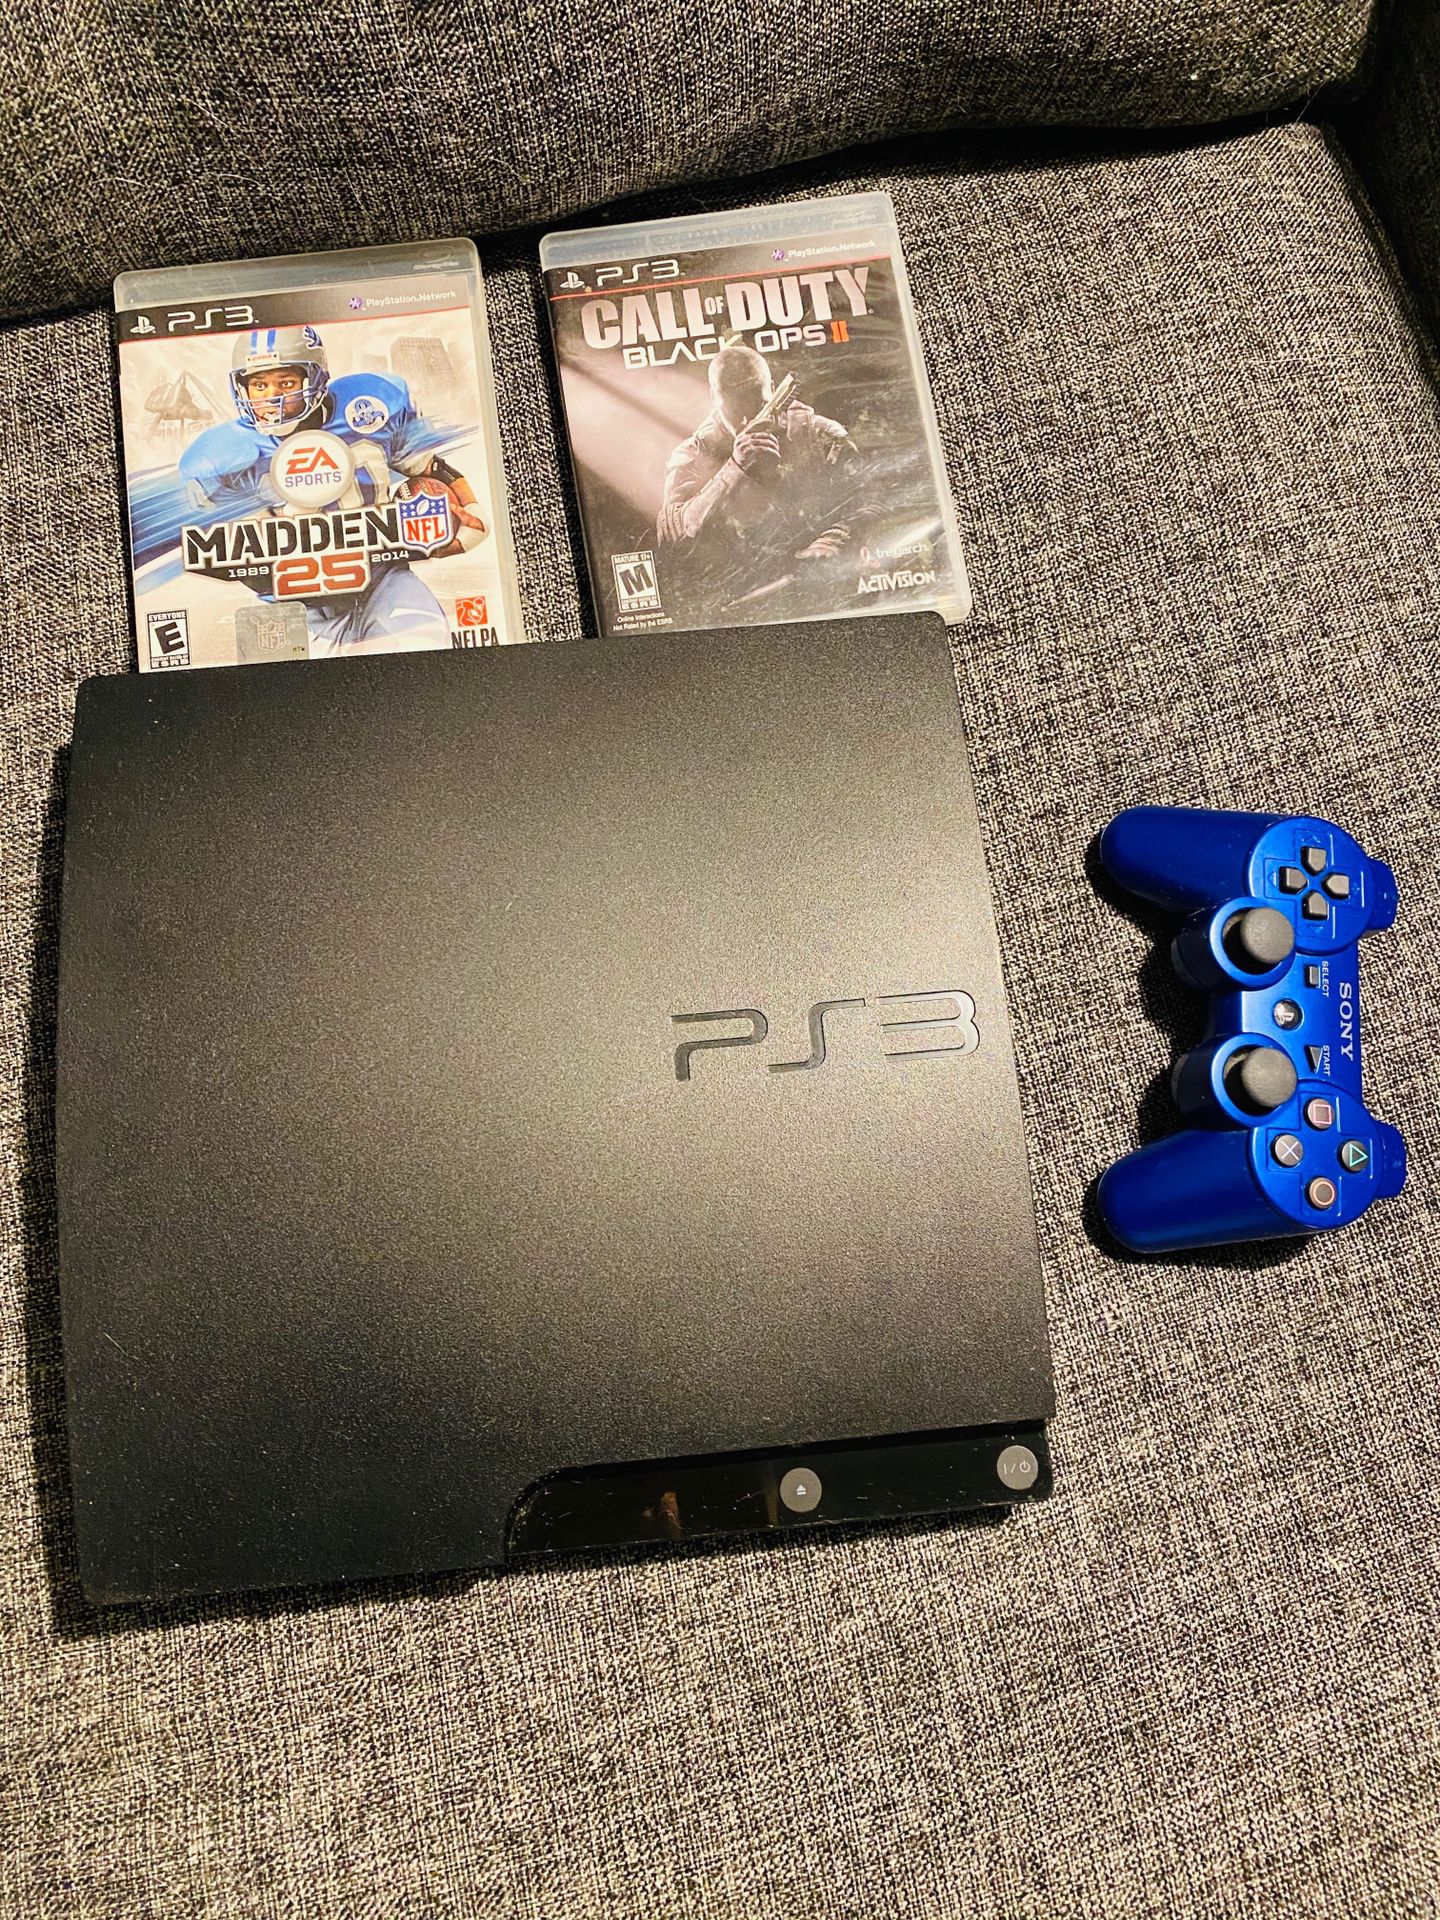 PS3 with games and controller